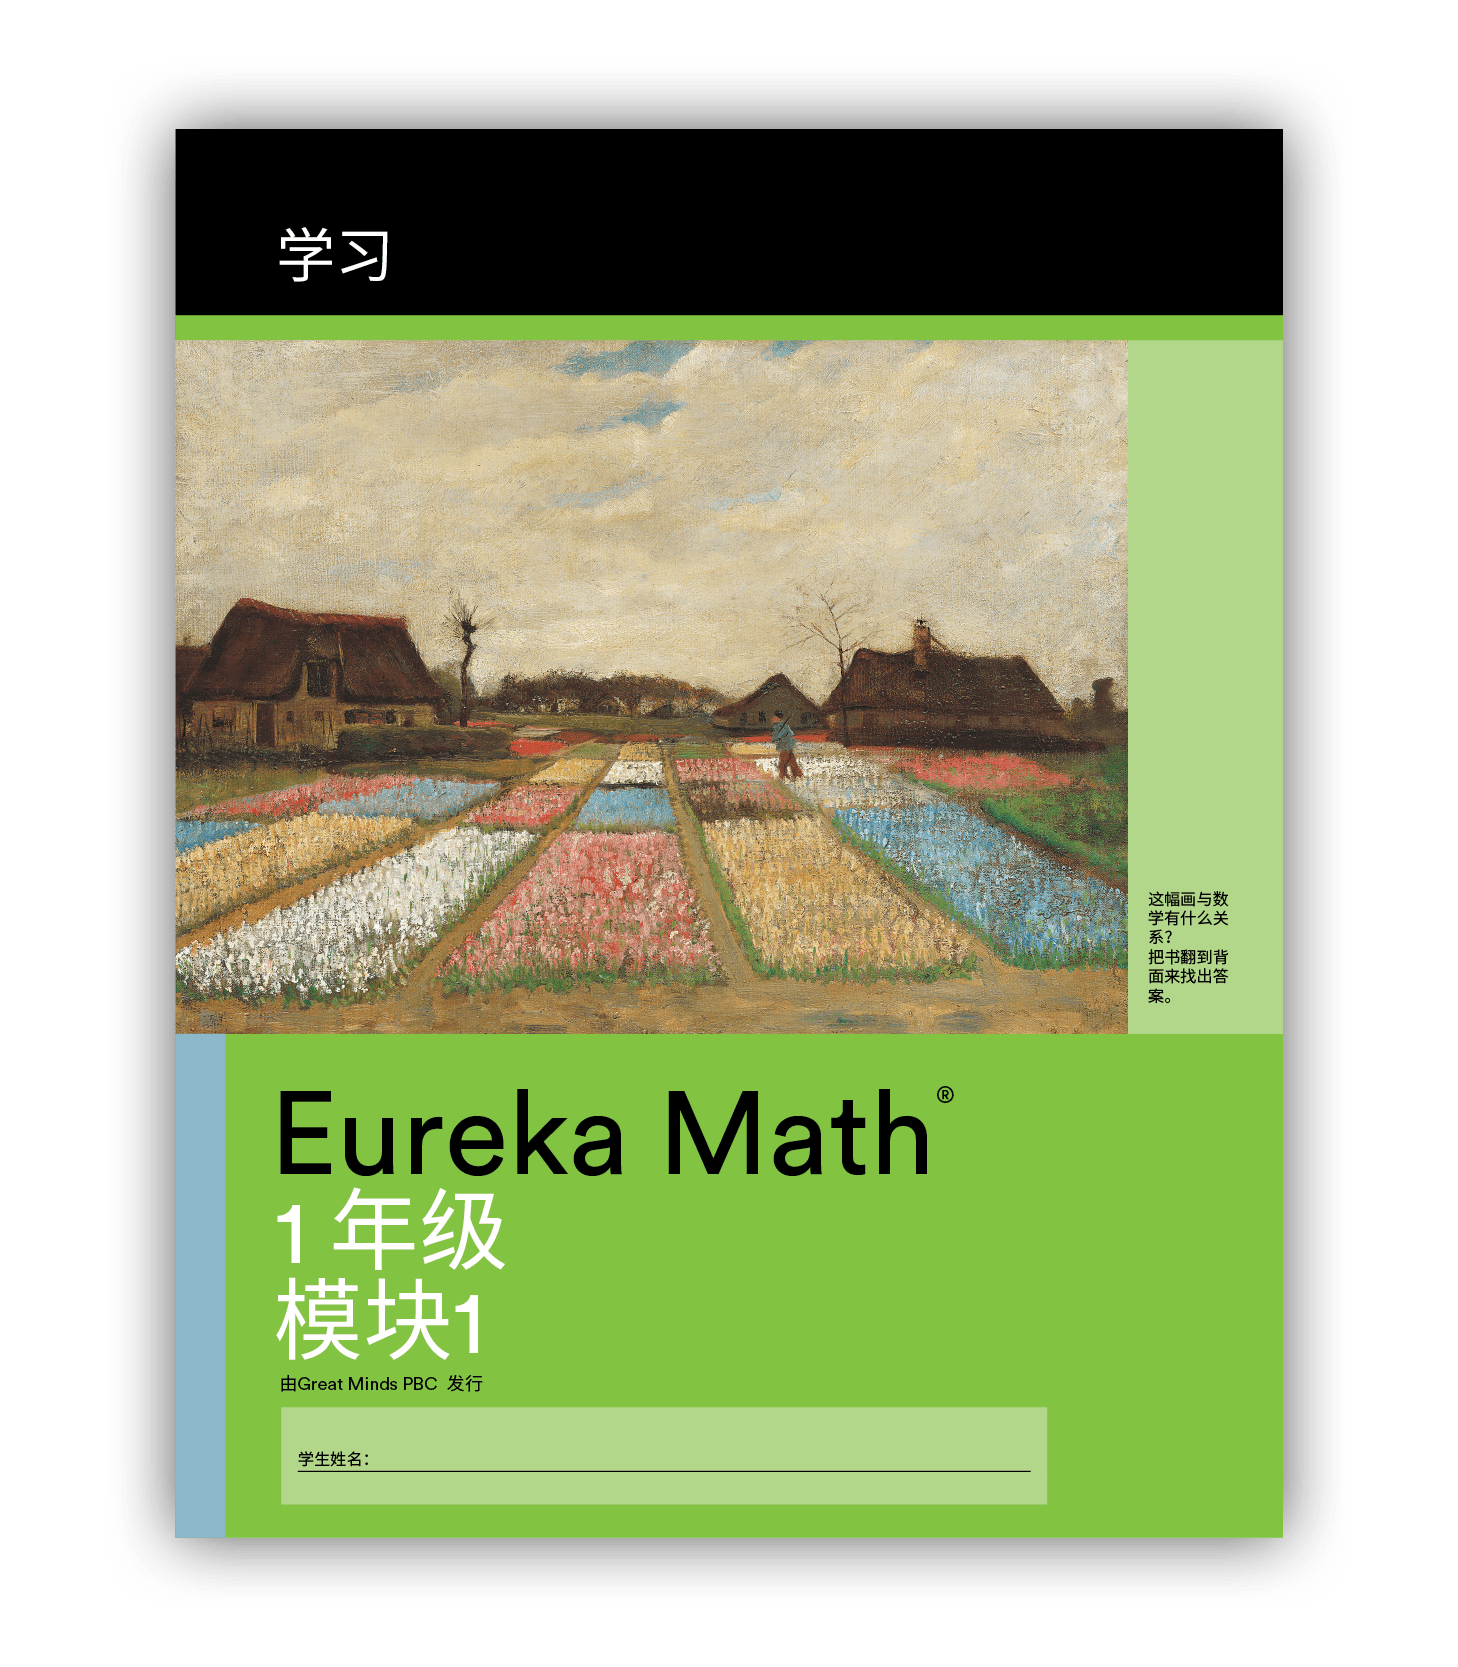 Eureka Math in Traditional Chinese